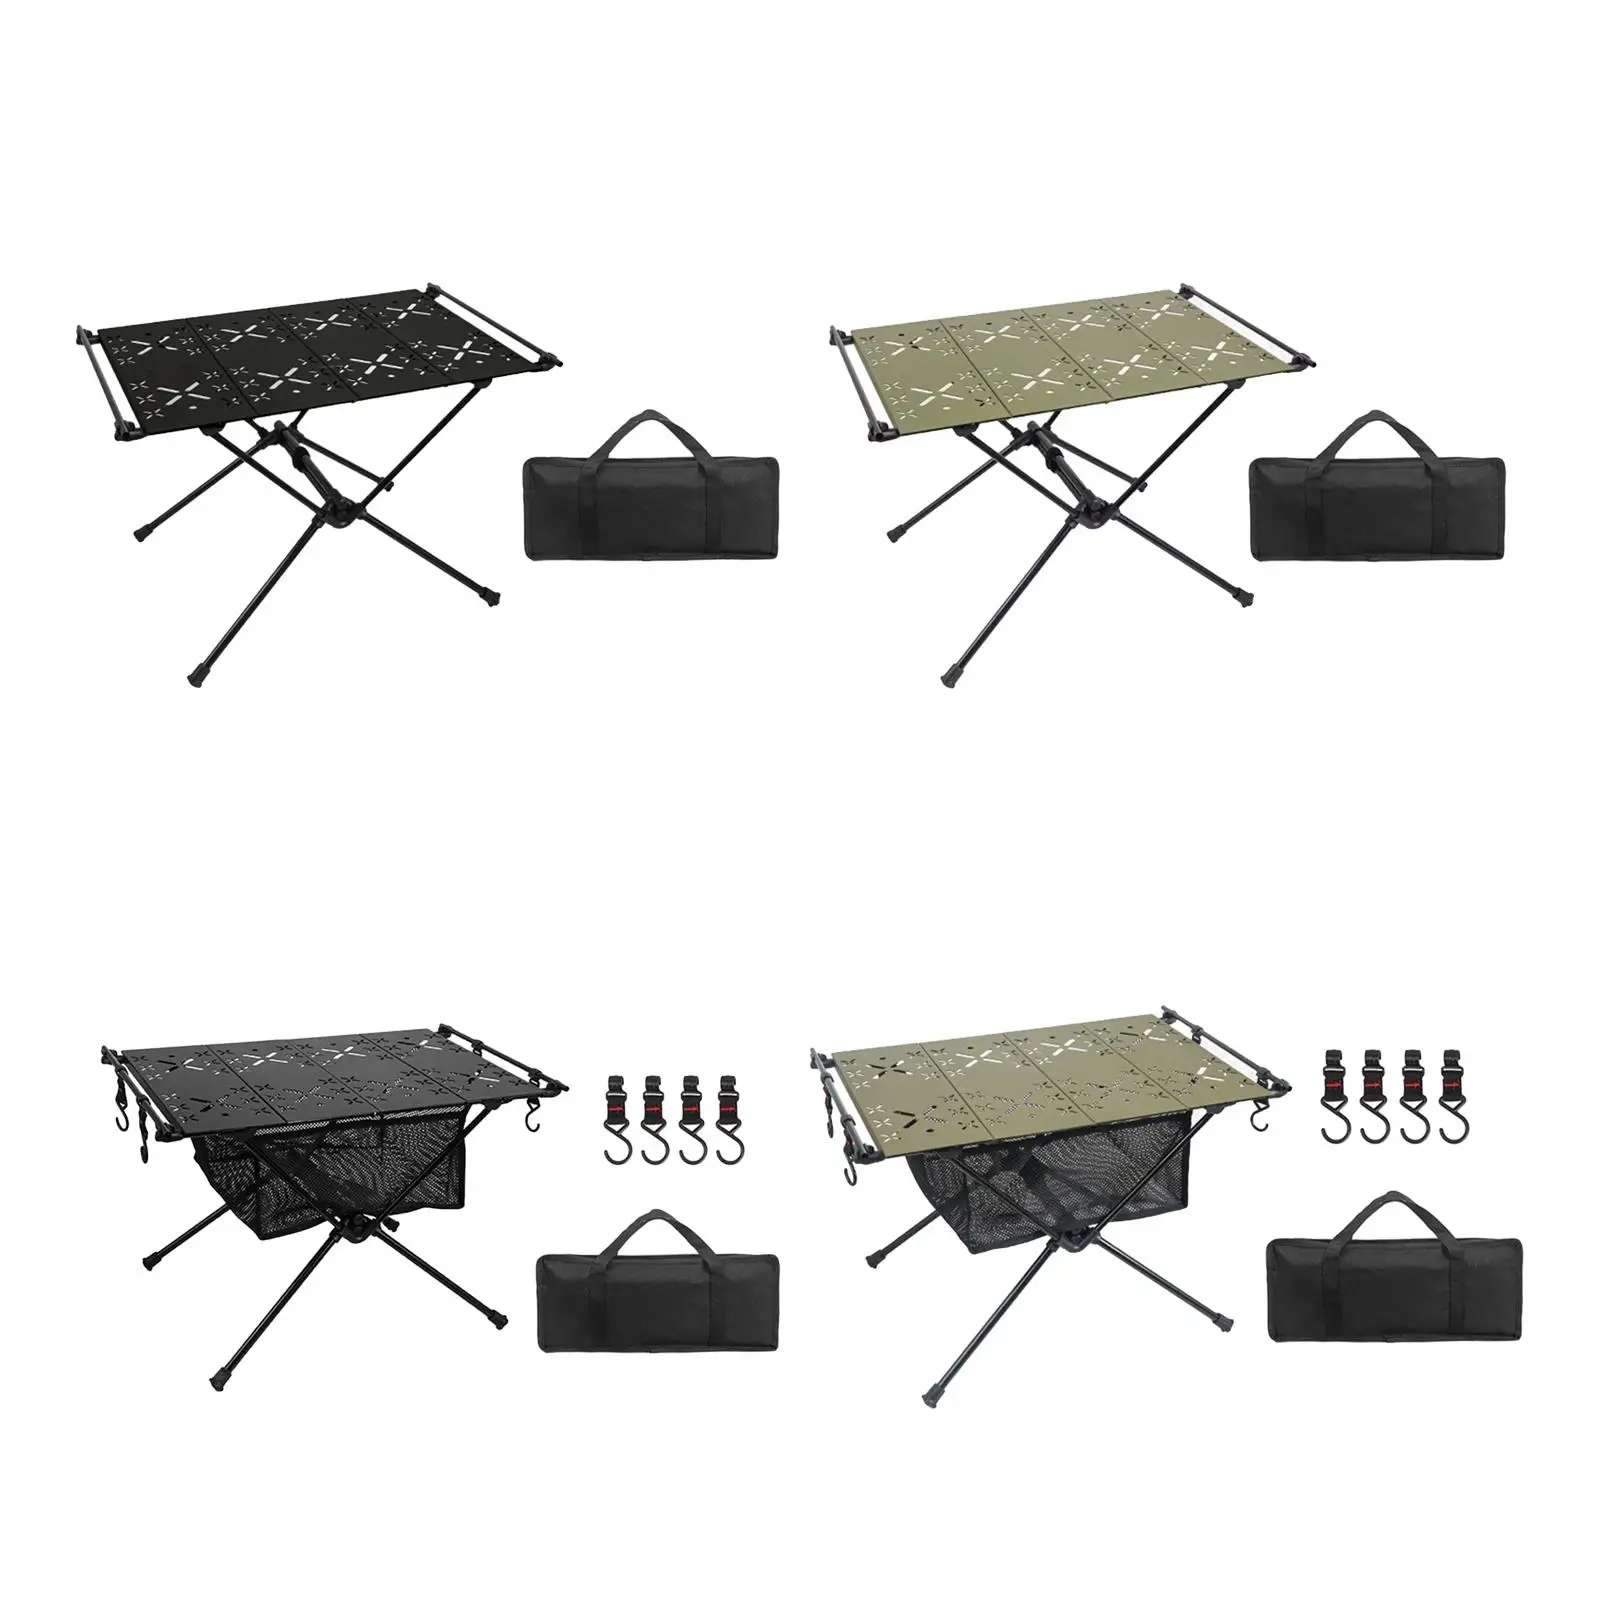 Foldable Camping Table with Storage Bag Ultralight Desk Outdoor Foldable Table for Garden Backyard Travel Fishing Yard